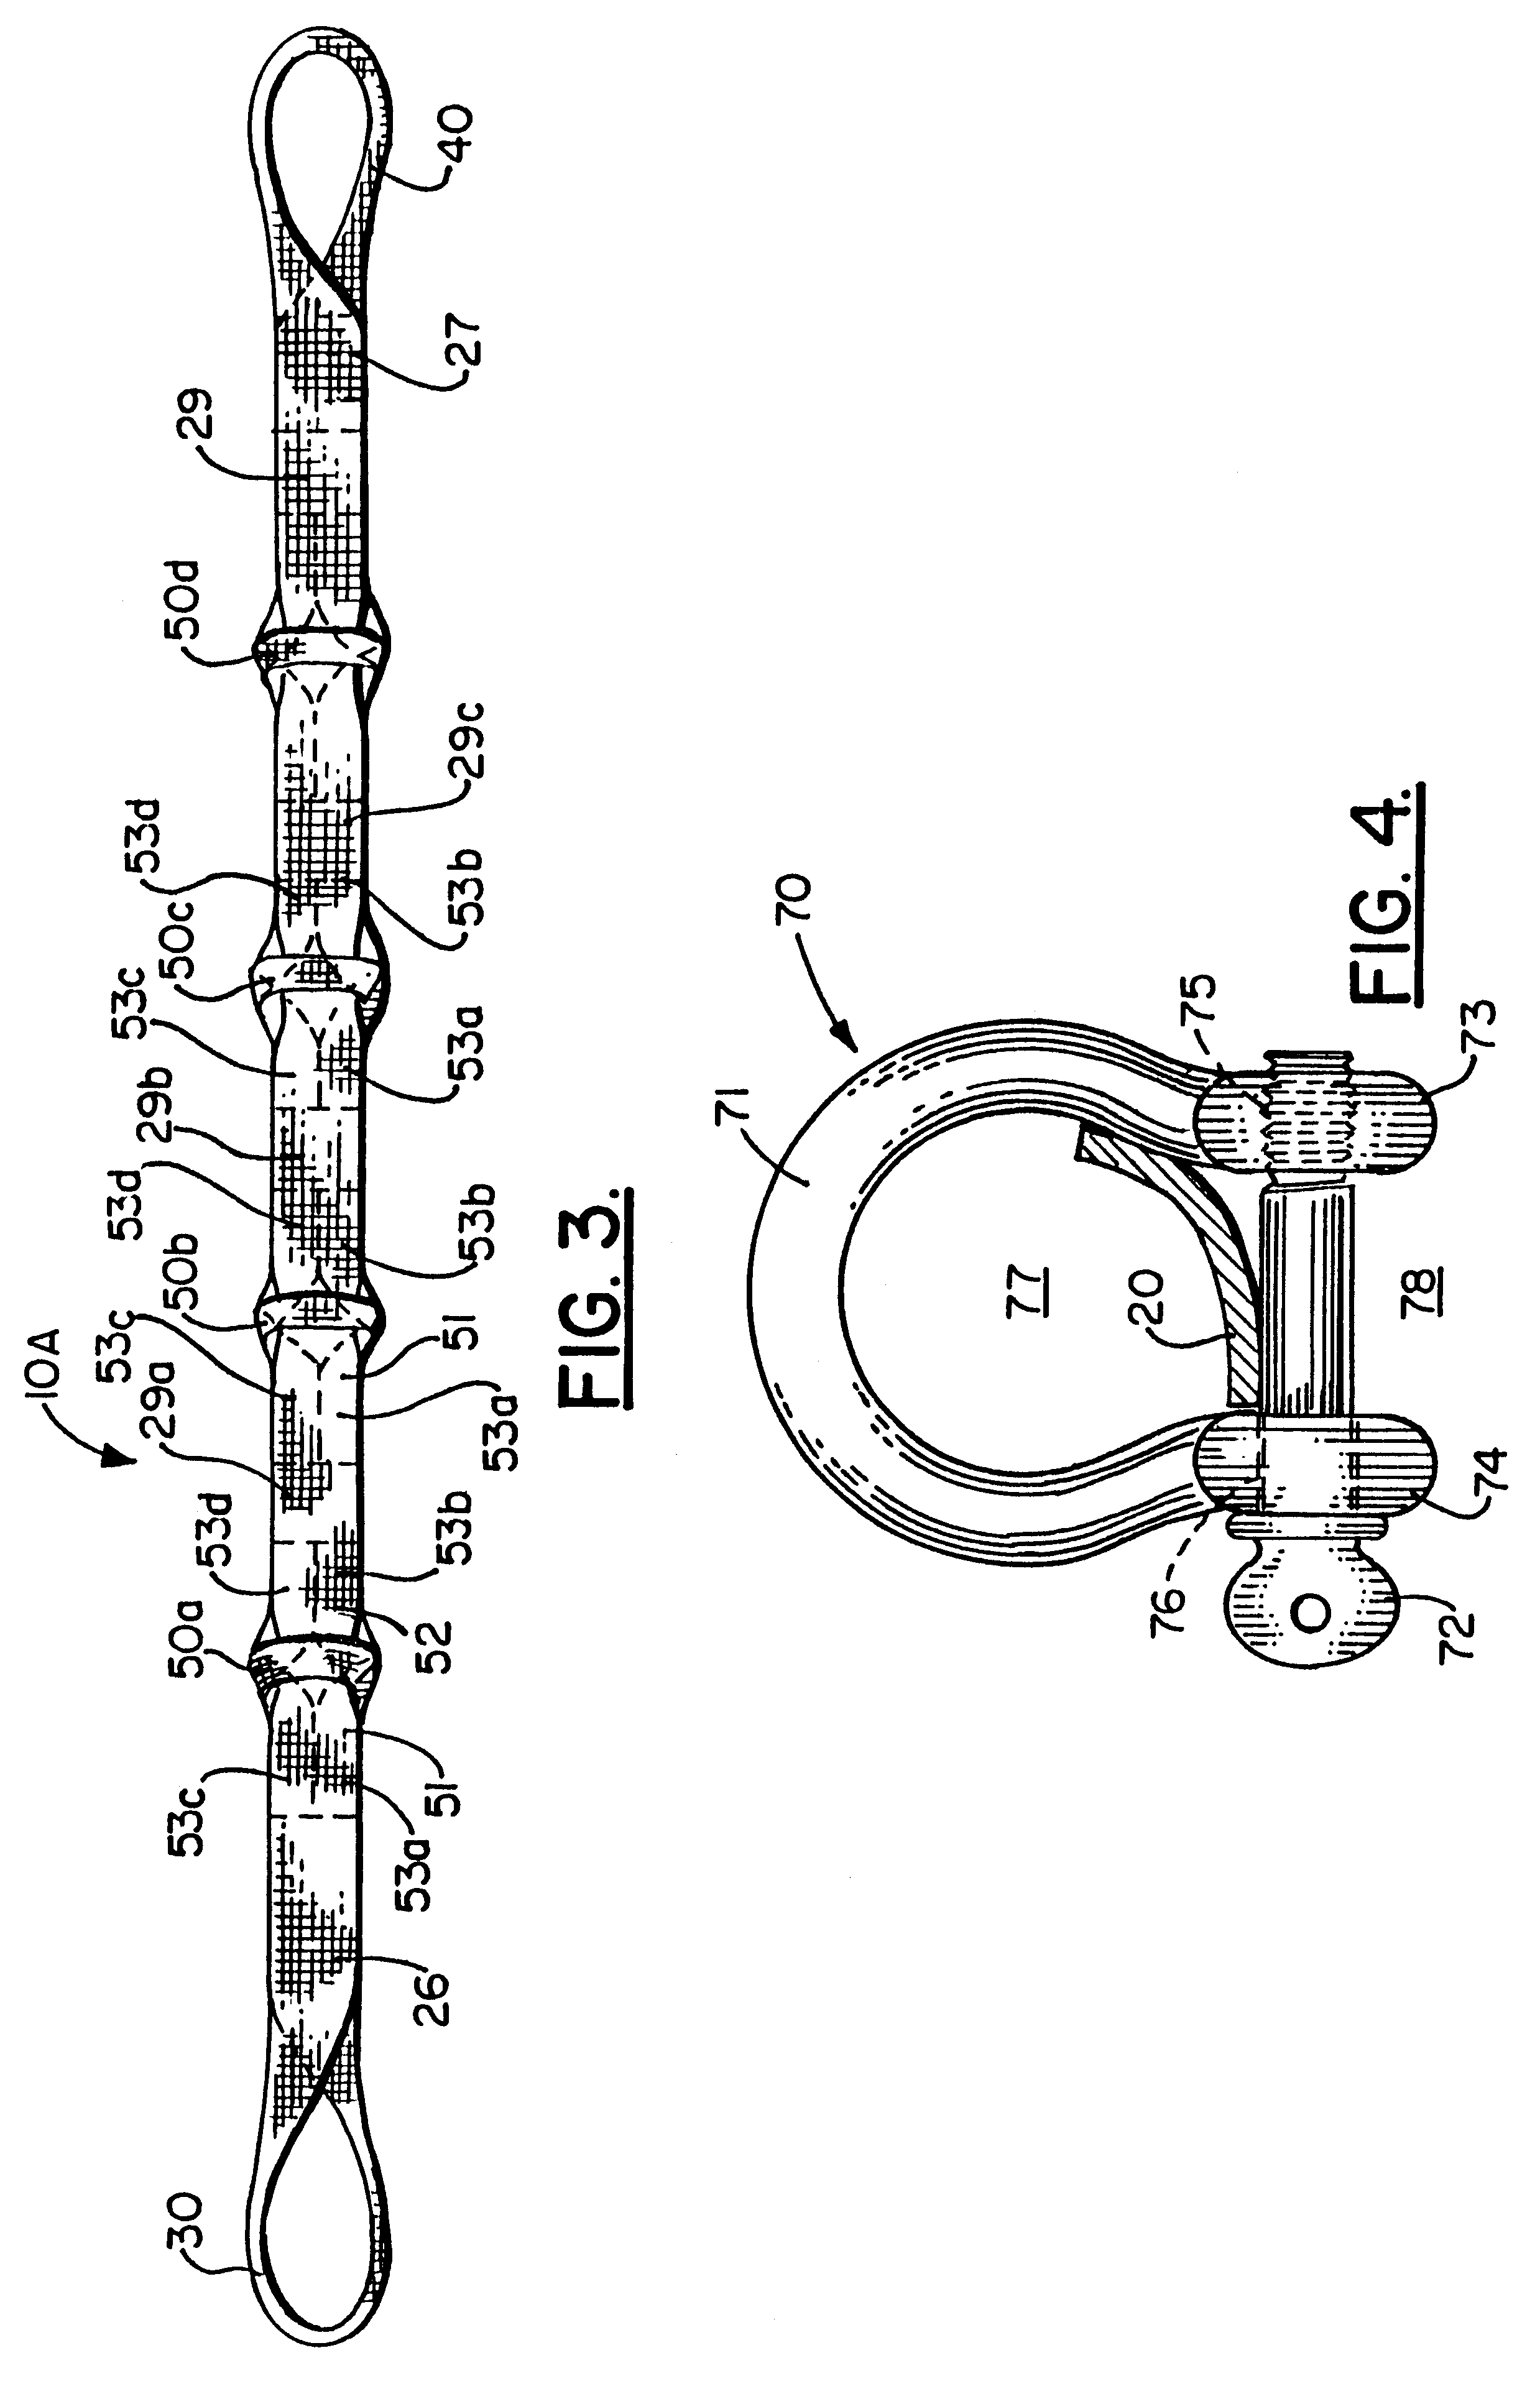 Lifting sling system with spaced, bi-directional loops